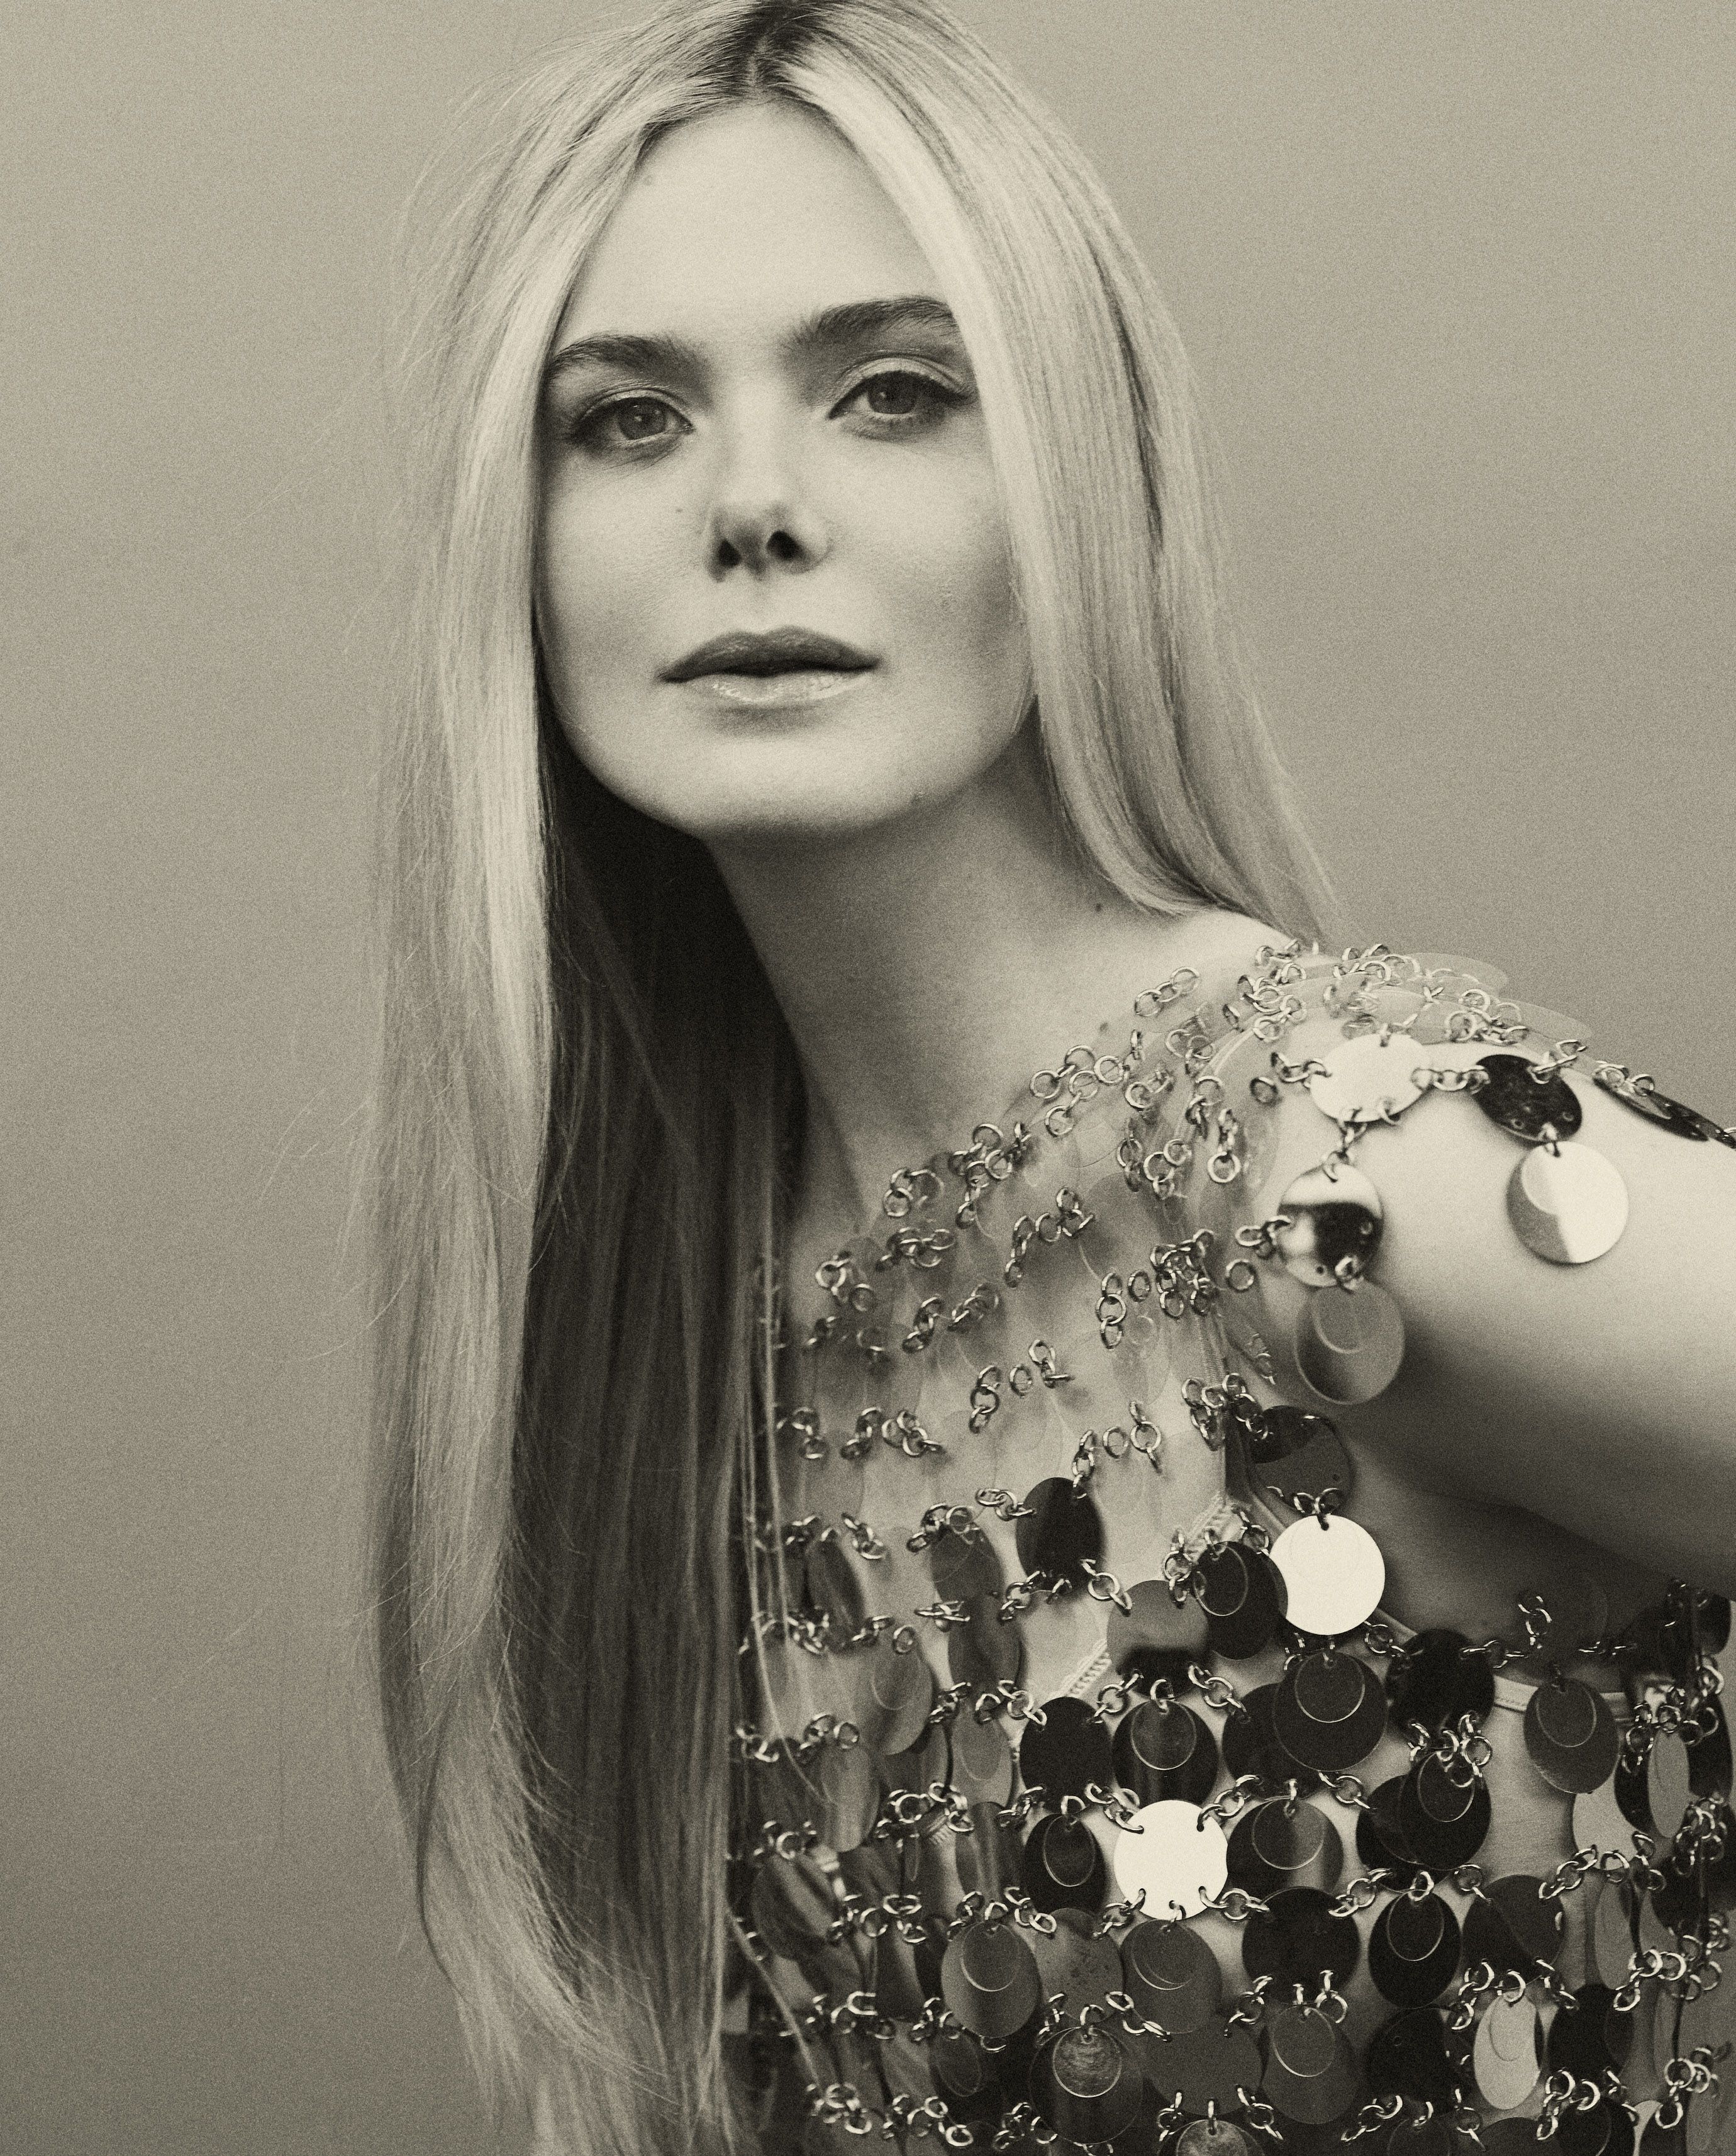 Elle Fanning Is a “Perfume Girl”, New Face of Paco Rabanne Fame